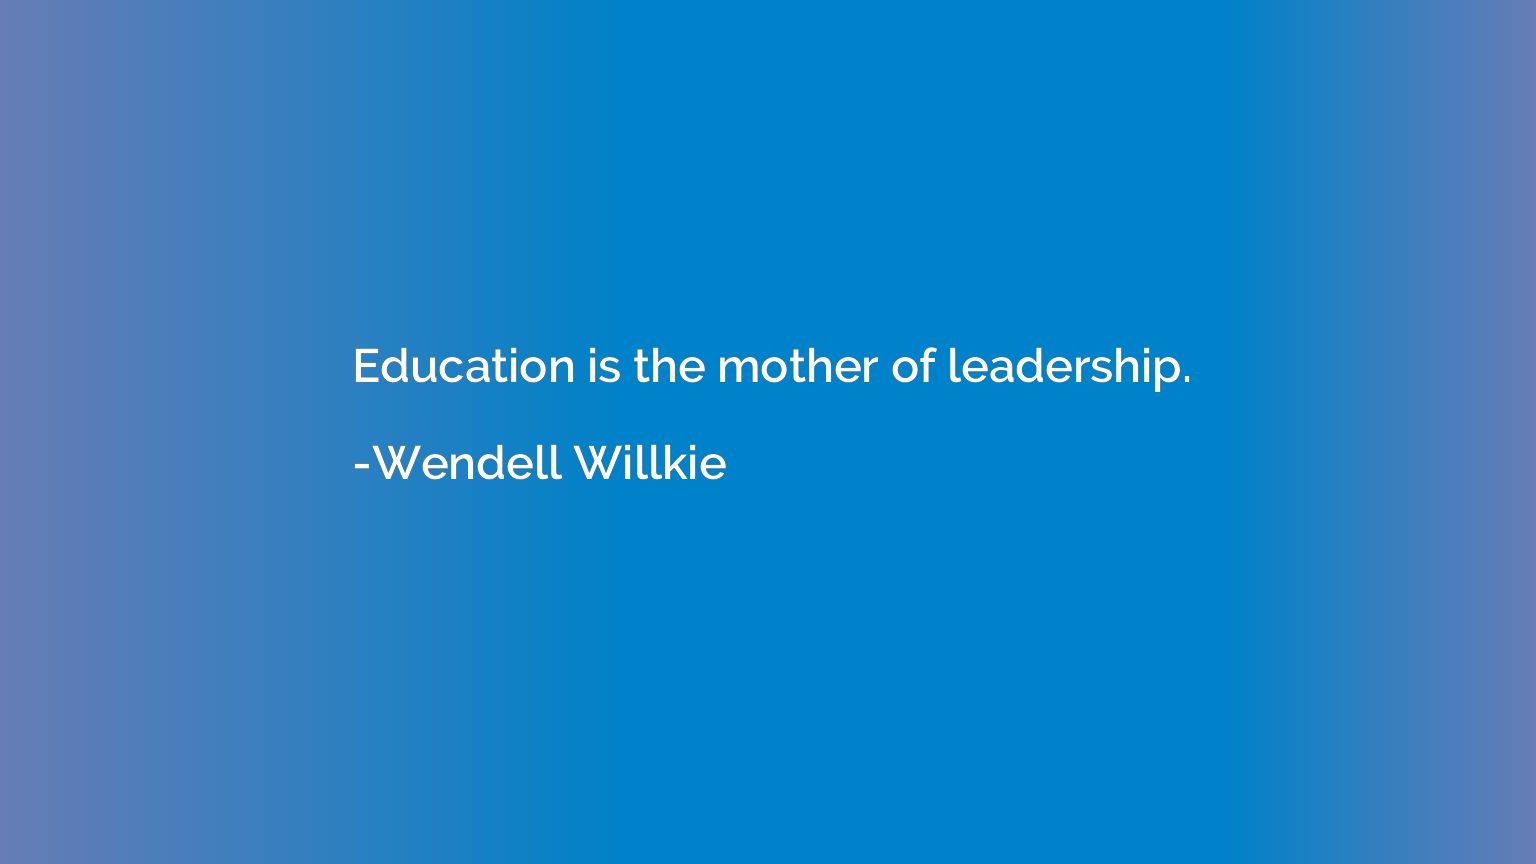 Education is the mother of leadership.